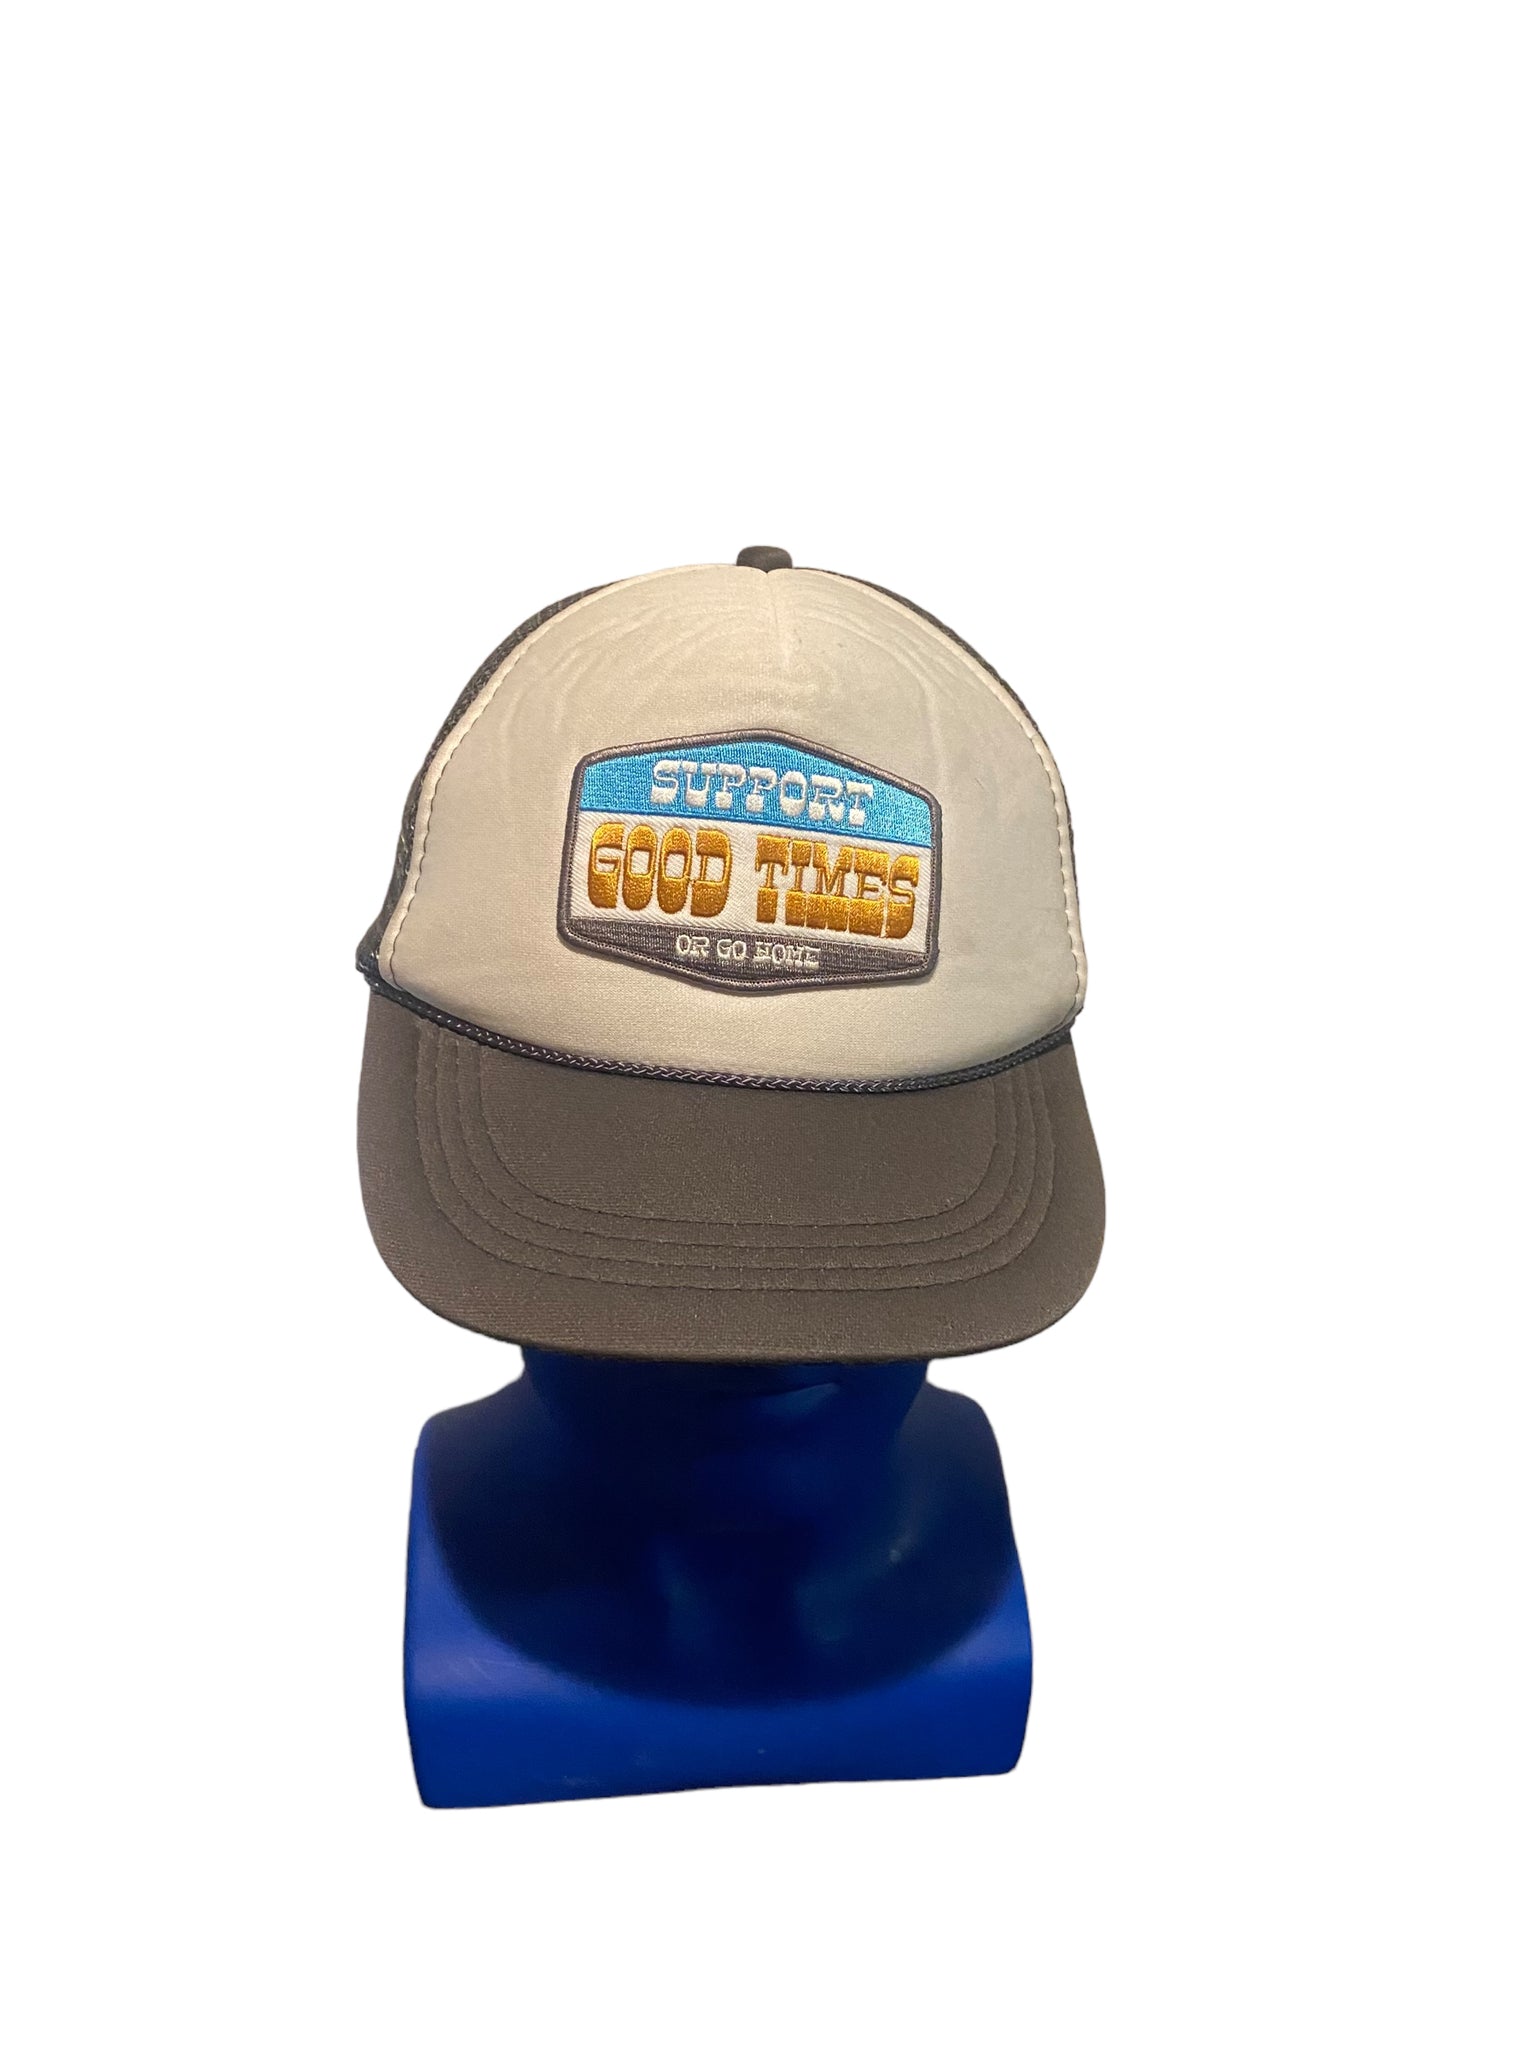 support good times or go home patch trucker hat snapback